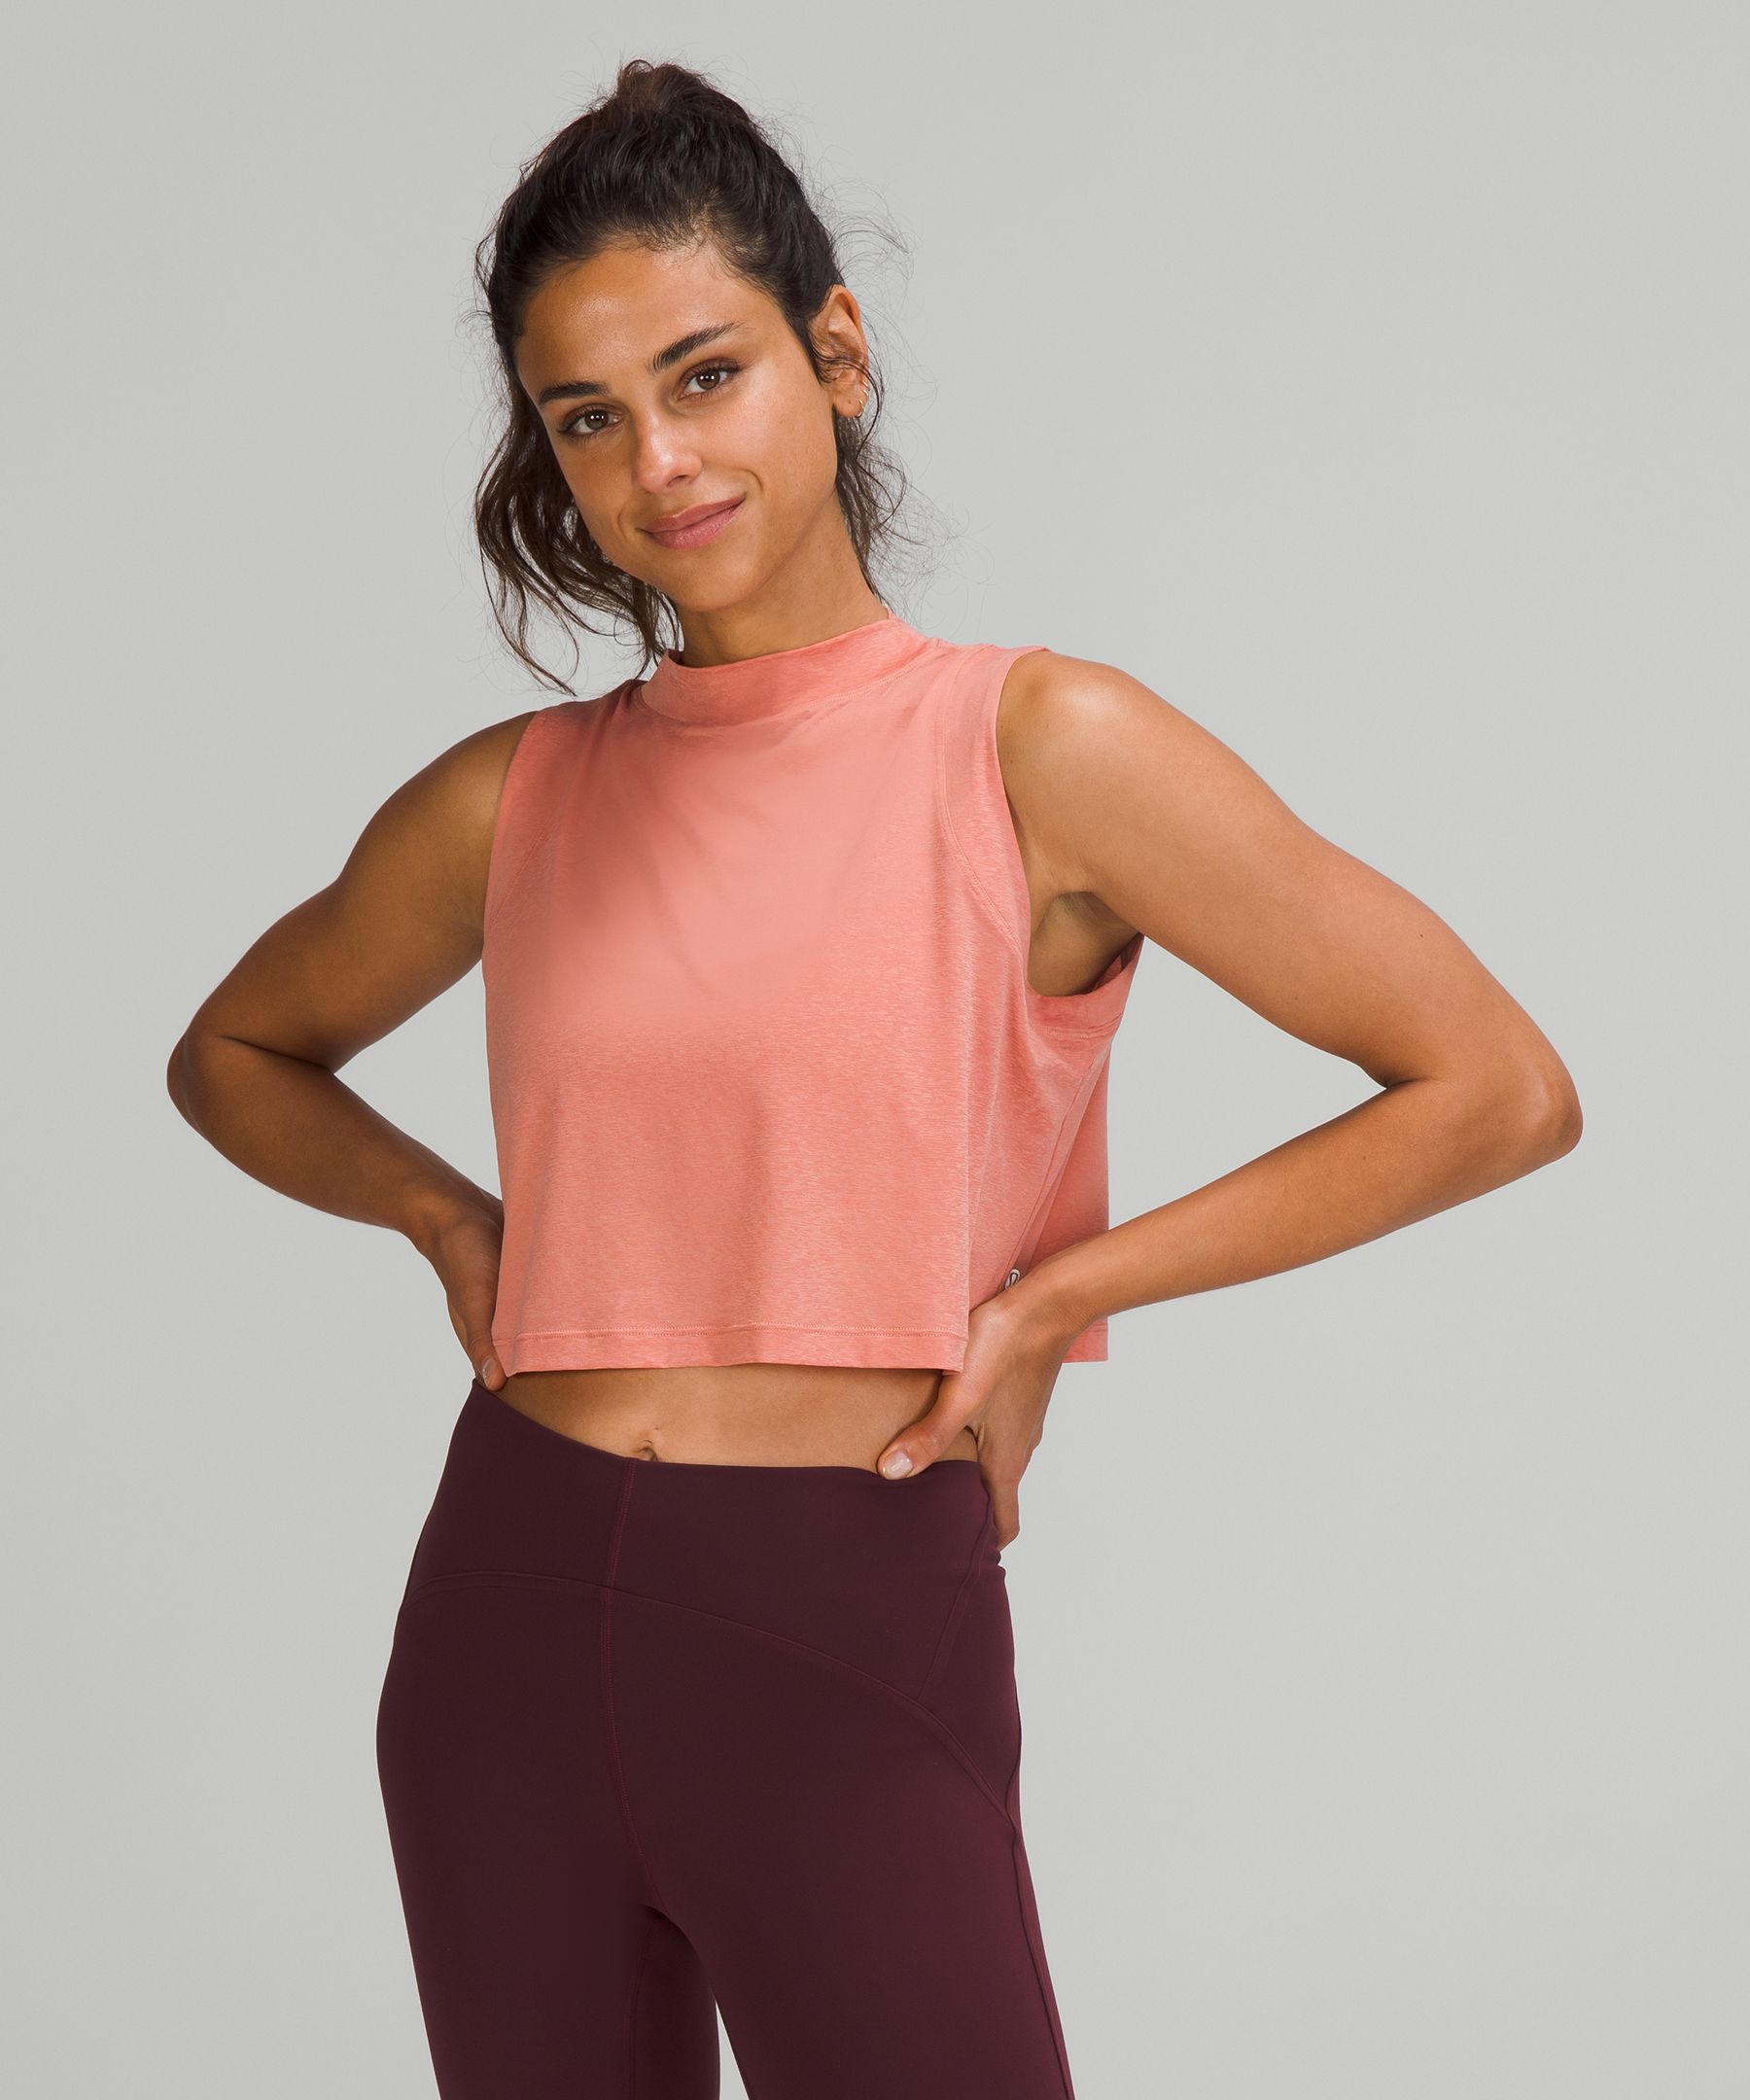 Flow Y 2-in-1 Cropped Tank Top *Light Support, B/C Cup